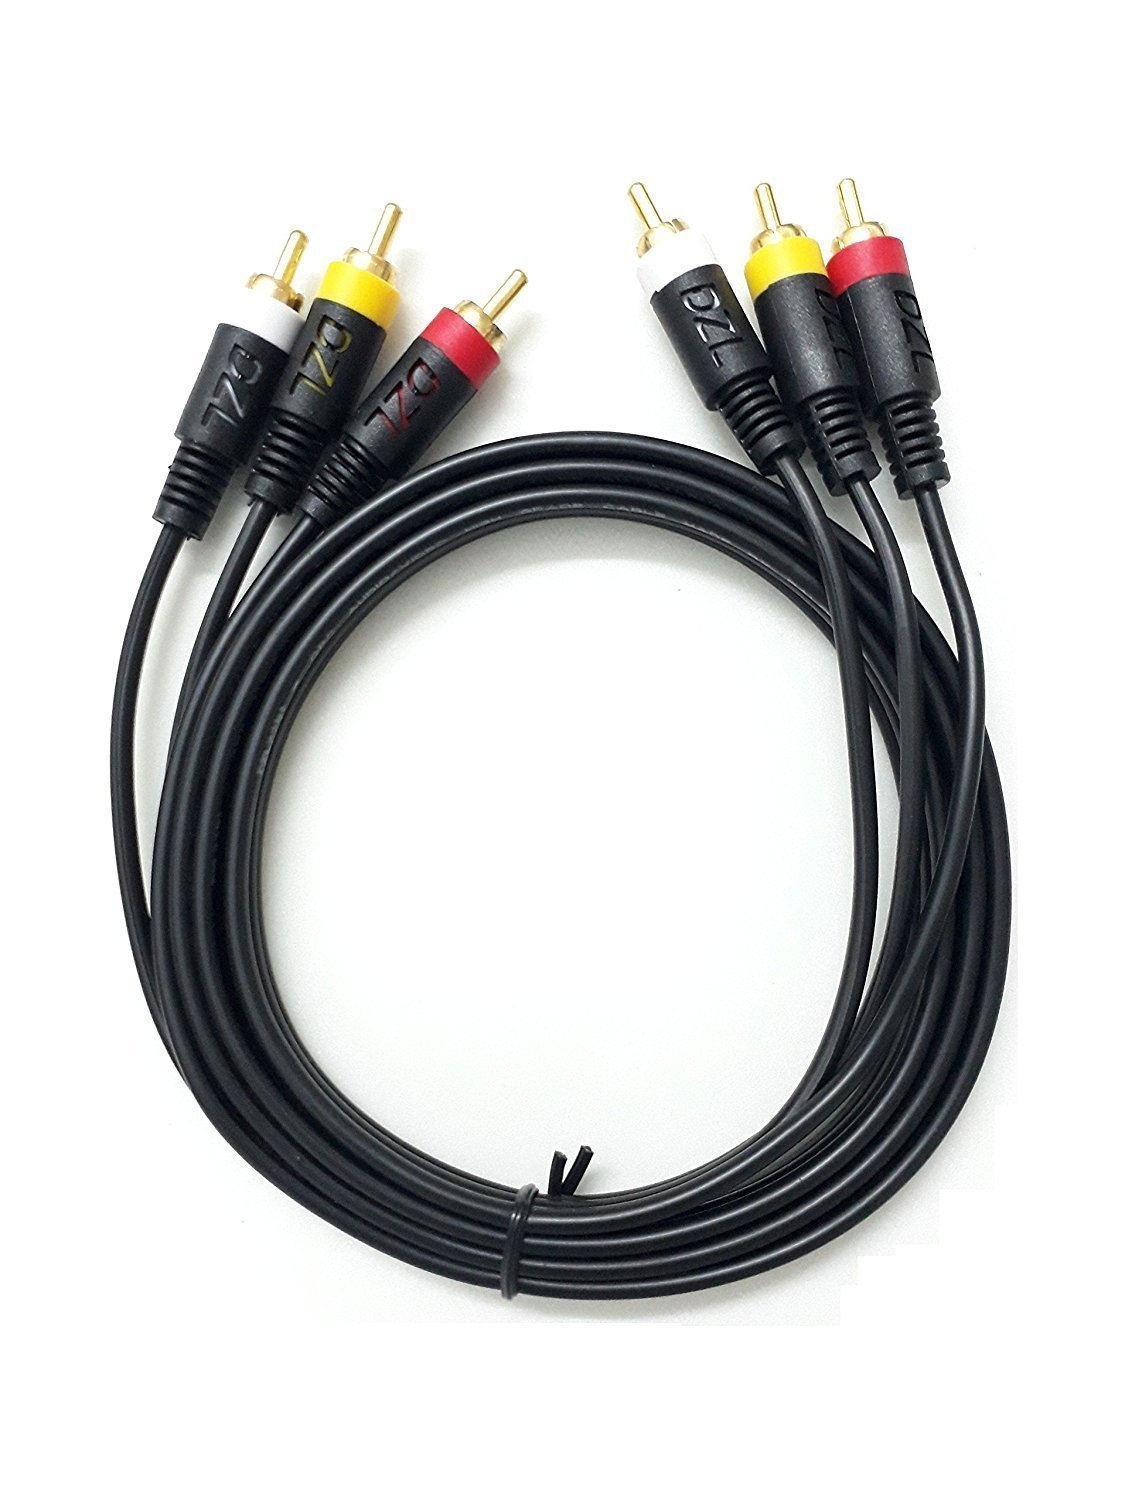 3rca Cable 3RCA Male to 3 RCA Male Composite Audio Video AV Cable line DVD AV Cable (3M)